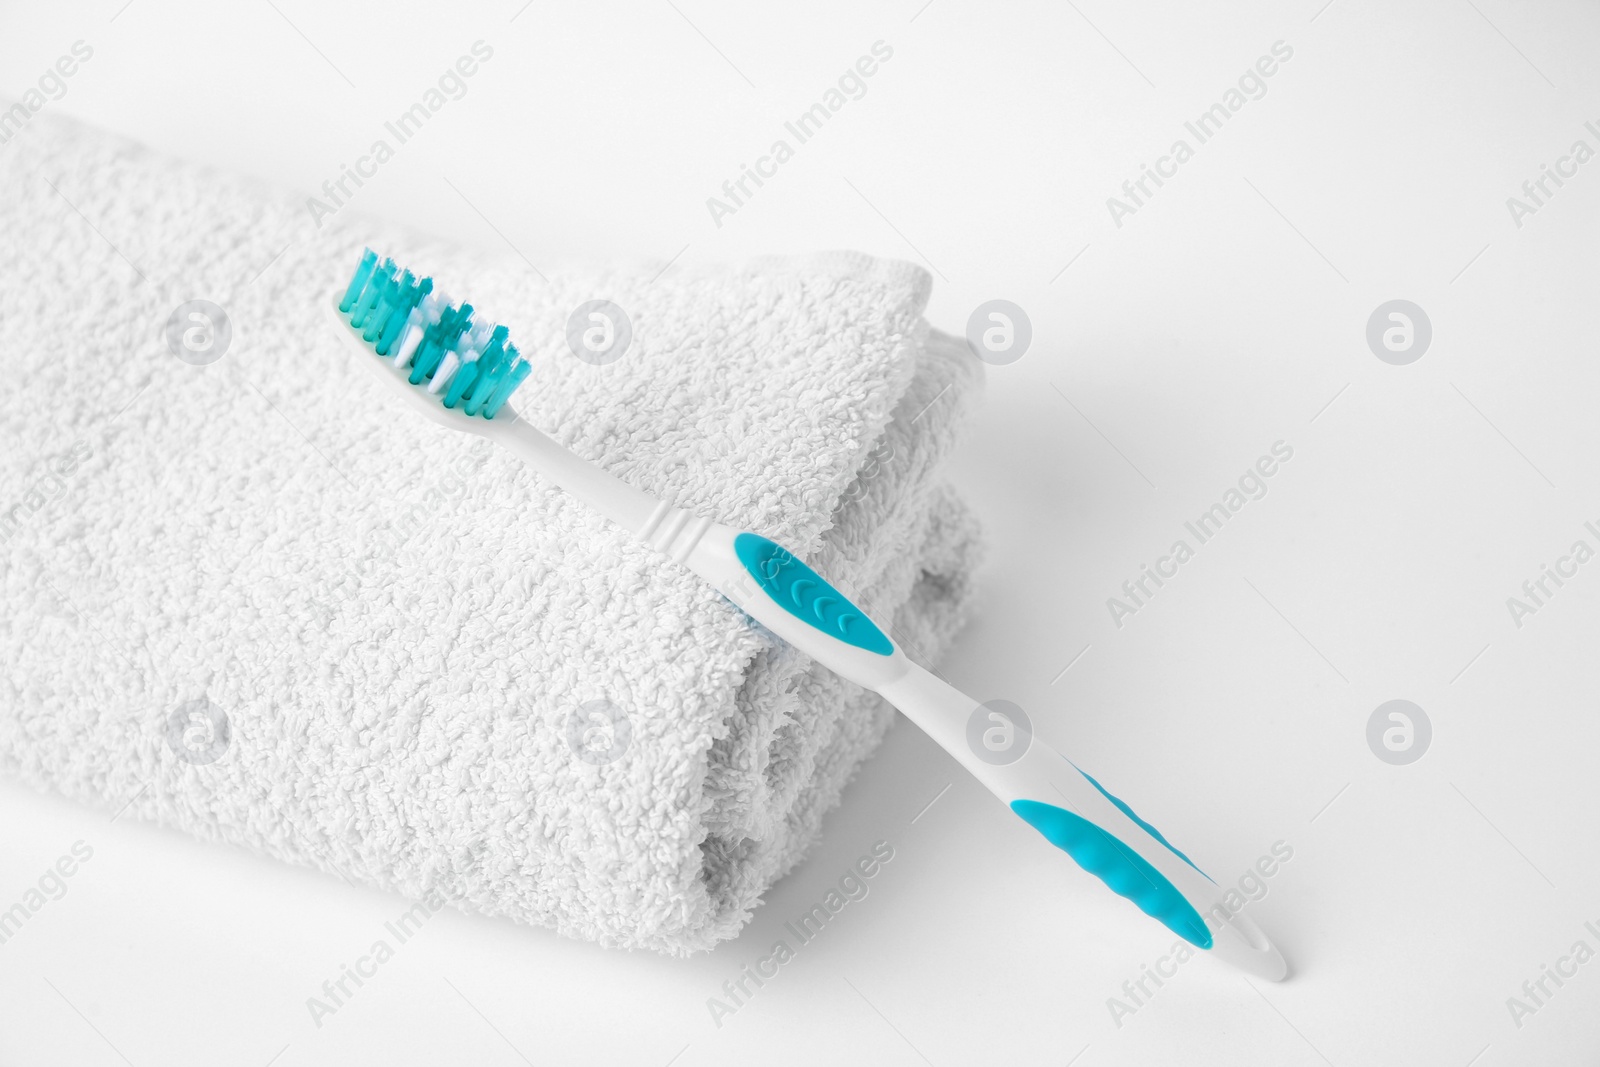 Photo of Light blue toothbrush and terry towel on white background